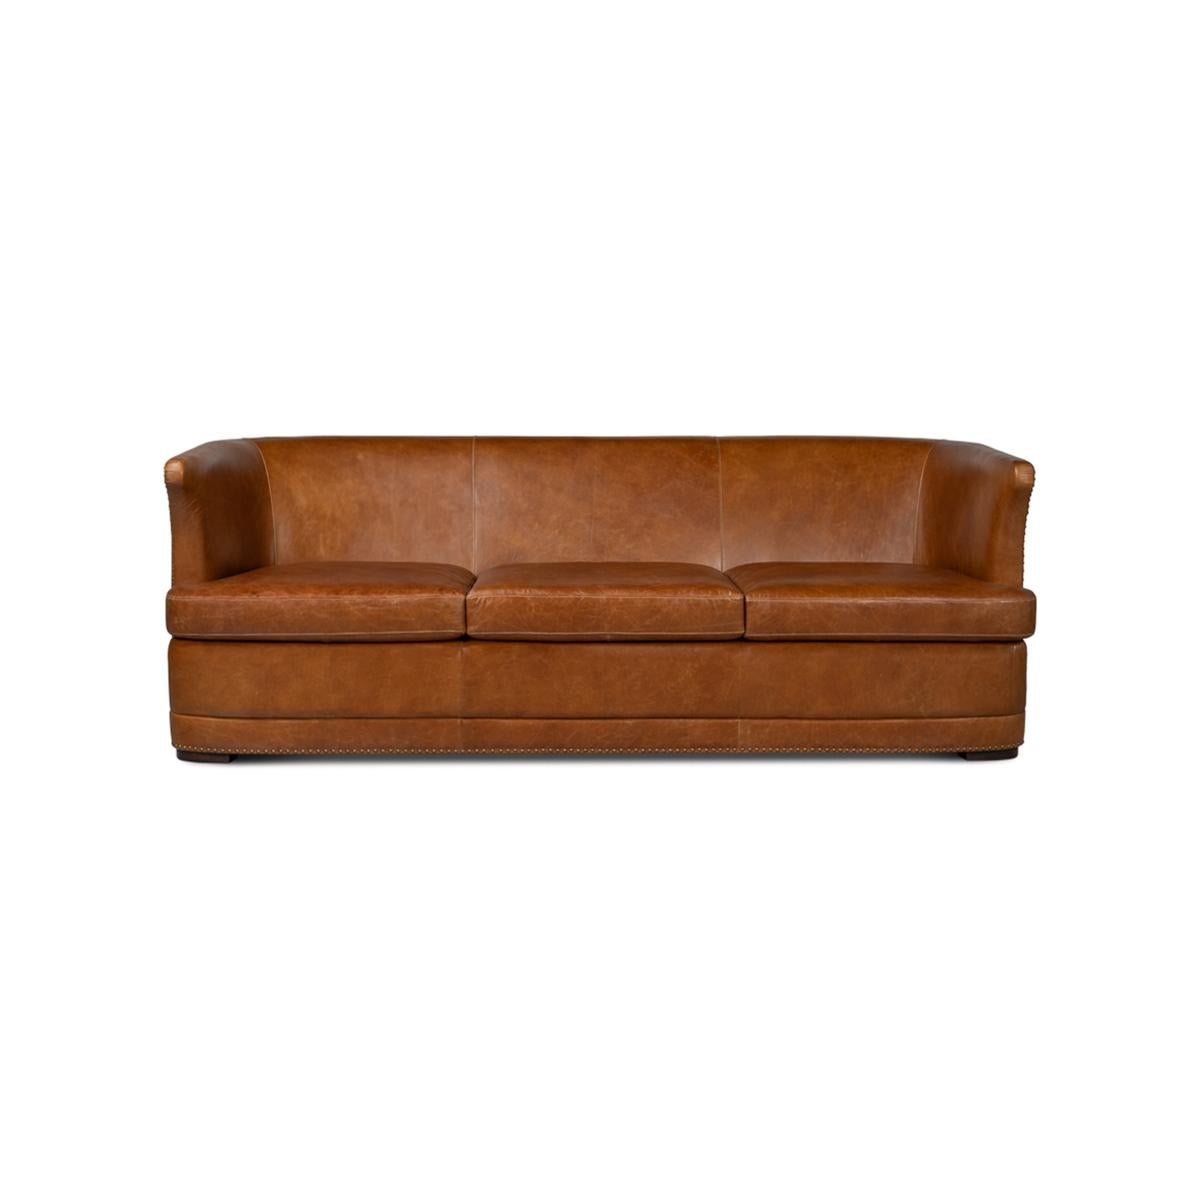 Stunning curvature and inviting supple leather. It is upholstered in Cuba brown leather, with generous depth and a perfect back height. 

With curved back ends and high arms, large antiqued nail heads offer a unique Western rustic appeal to the